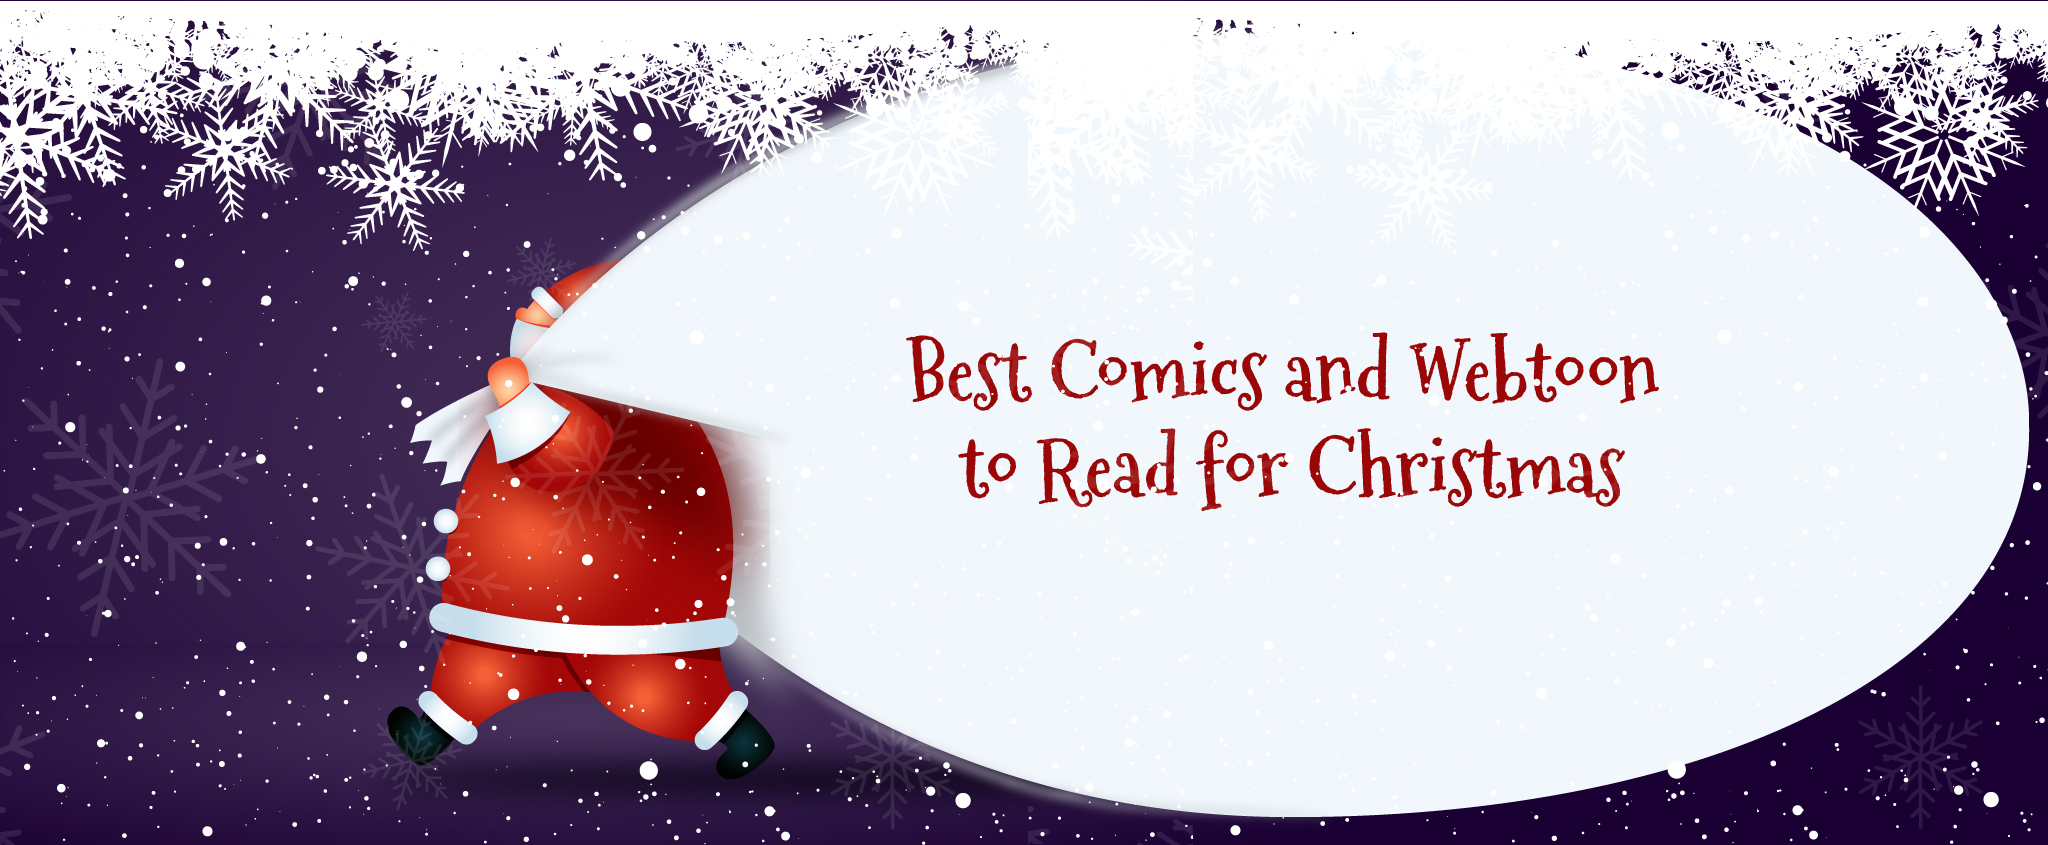 Best Comics and Webtoon to Read for Christmas